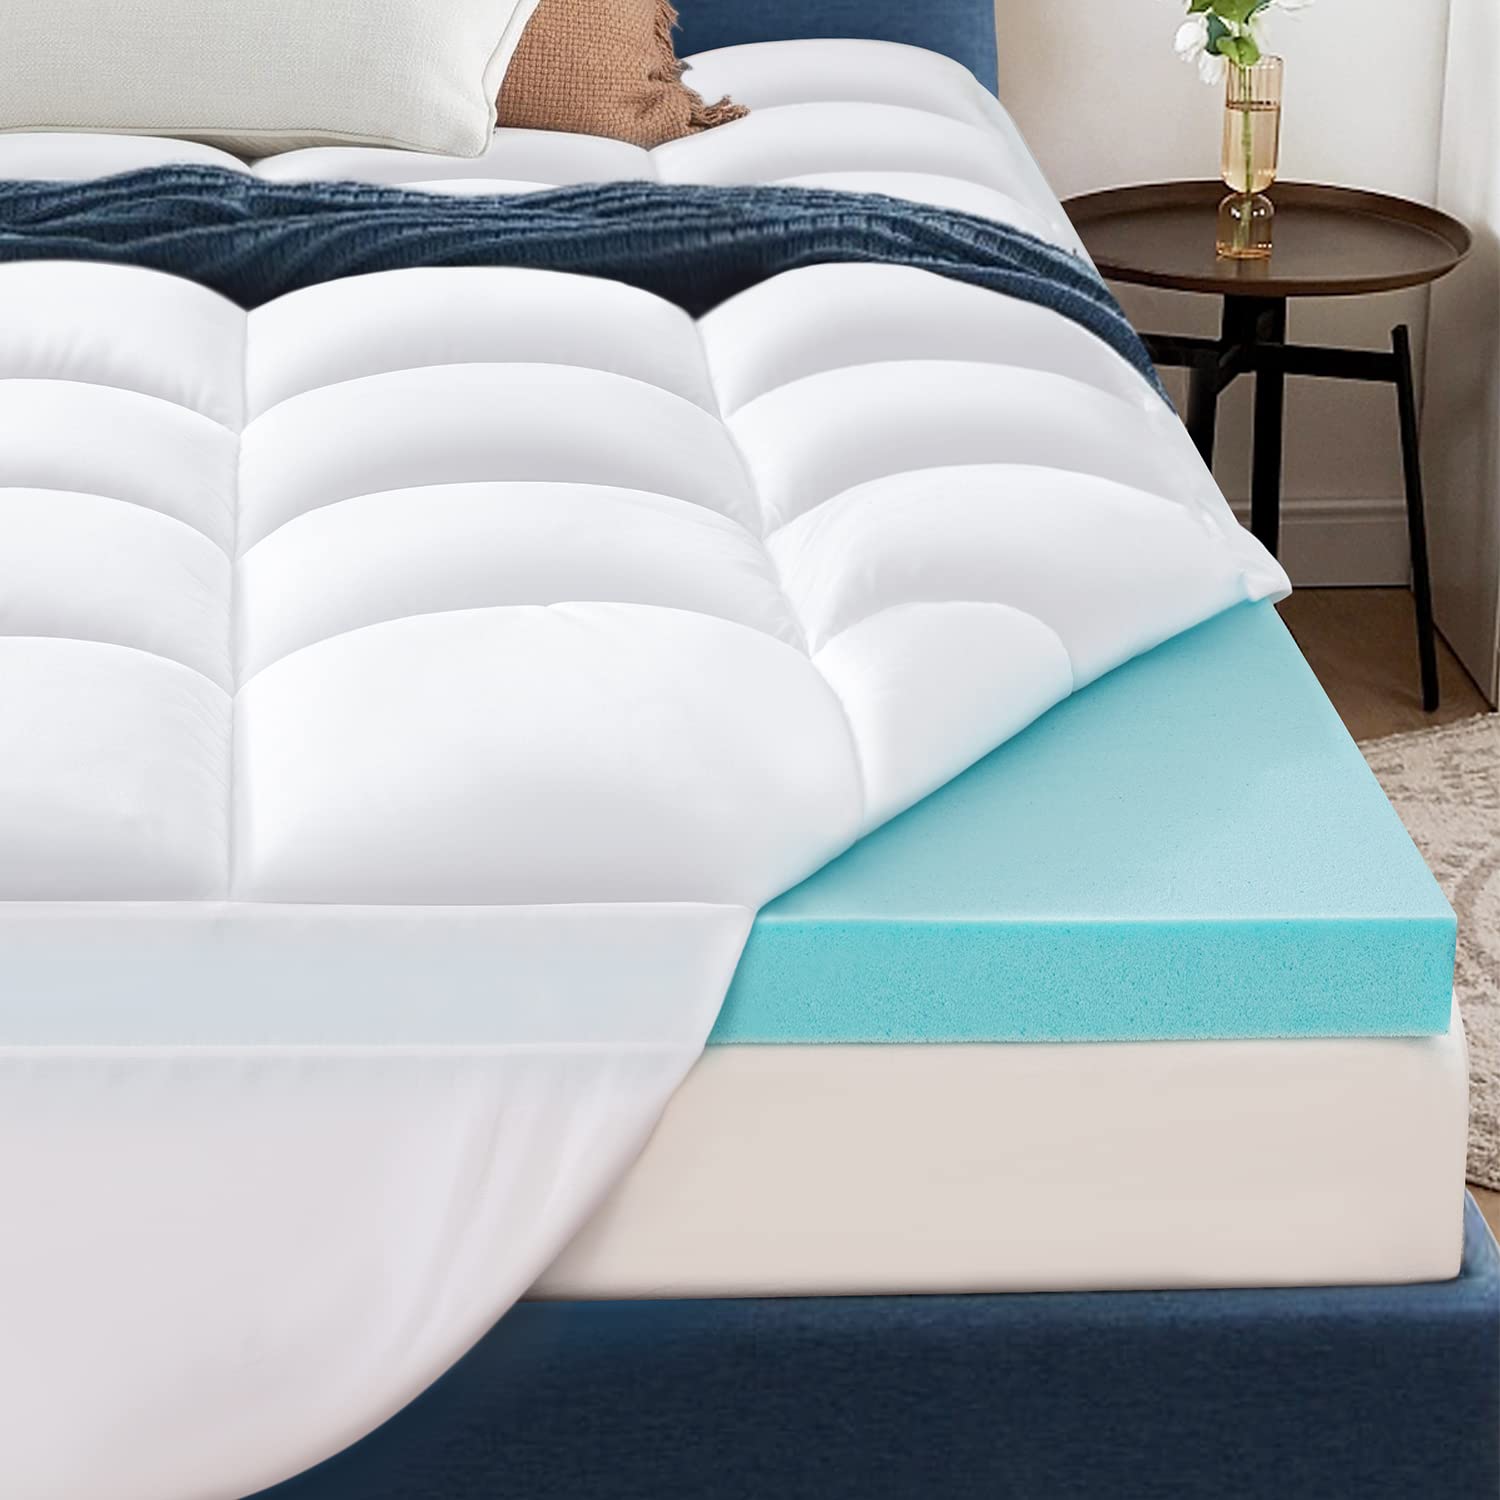 Elemuse Dual-Layer Memory Foam Mattress Topper Double Bed for Back Pain - Cooling Mattress Topper with Washable Mattress Cover, Firm Mattress Topper with OEKO-TEX & CertiPUR-US (Double Size-135x190cm)